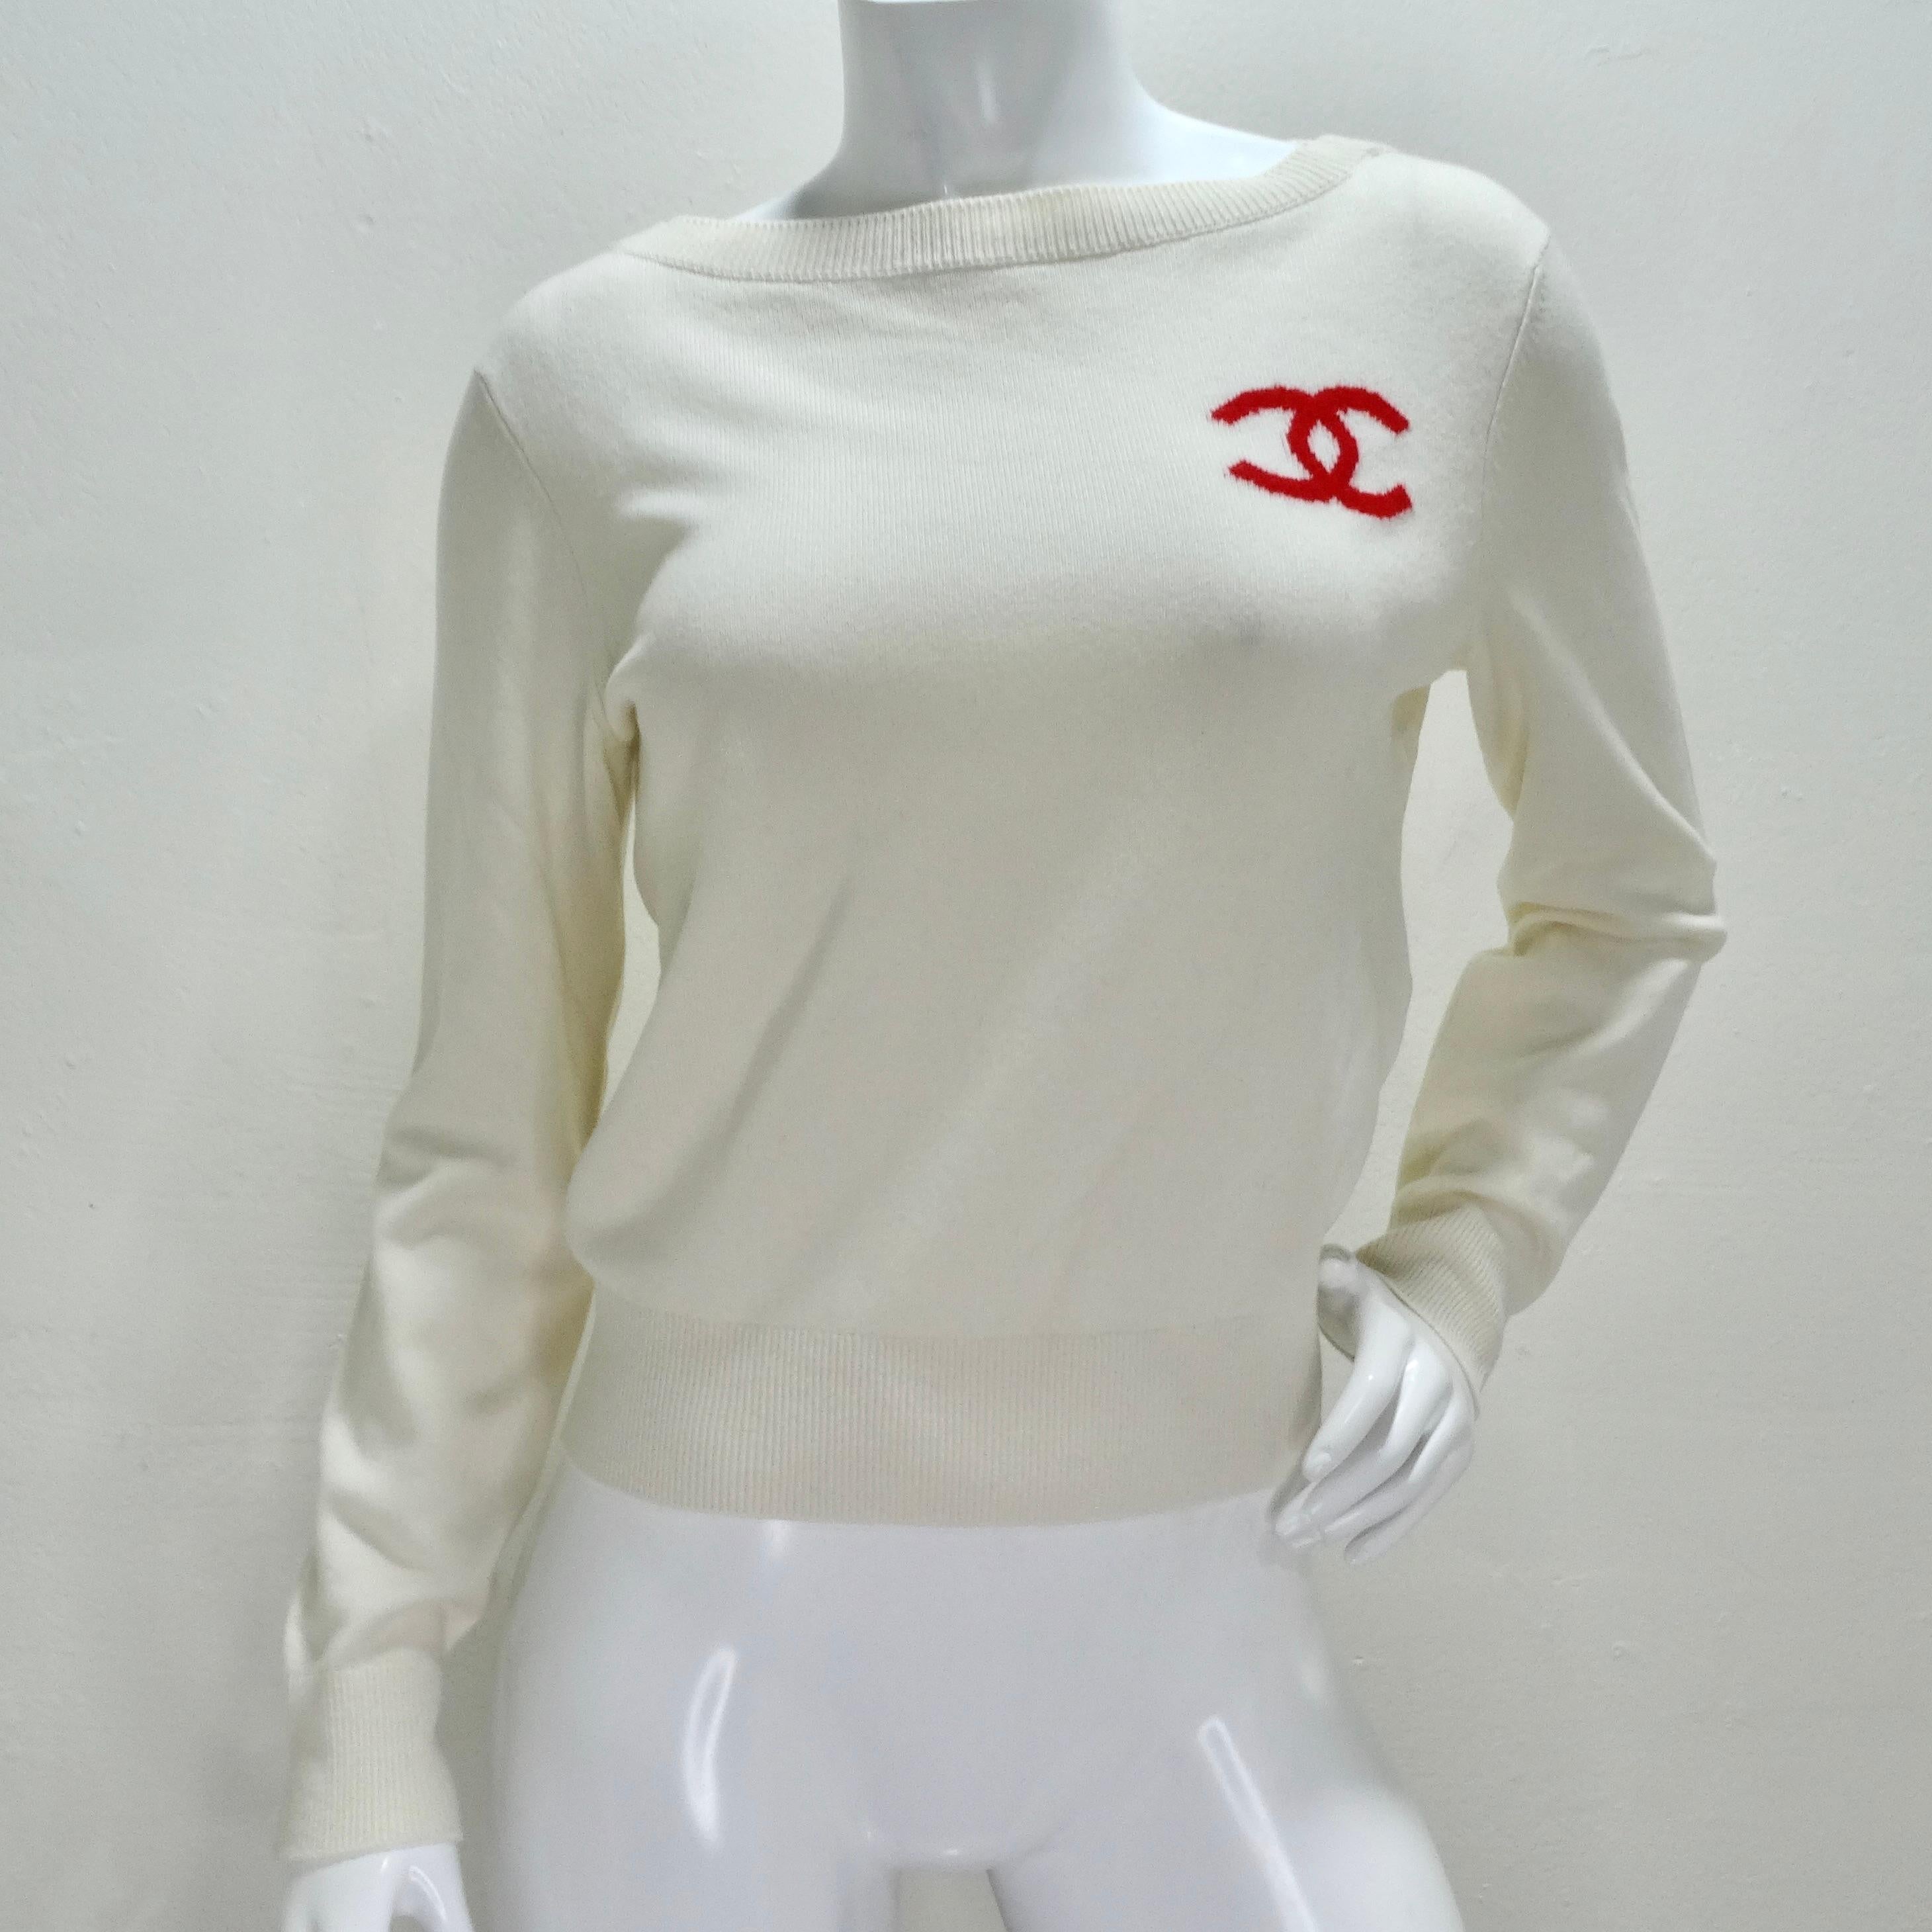 Indulge in timeless sophistication with the Chanel 2019 La Pausa Cashmere Sweater. This ivory crewneck sweater, crafted from sumptuous cashmere, exudes luxury and comfort. The iconic red interlocking 'C' logo on the front adds a signature touch of